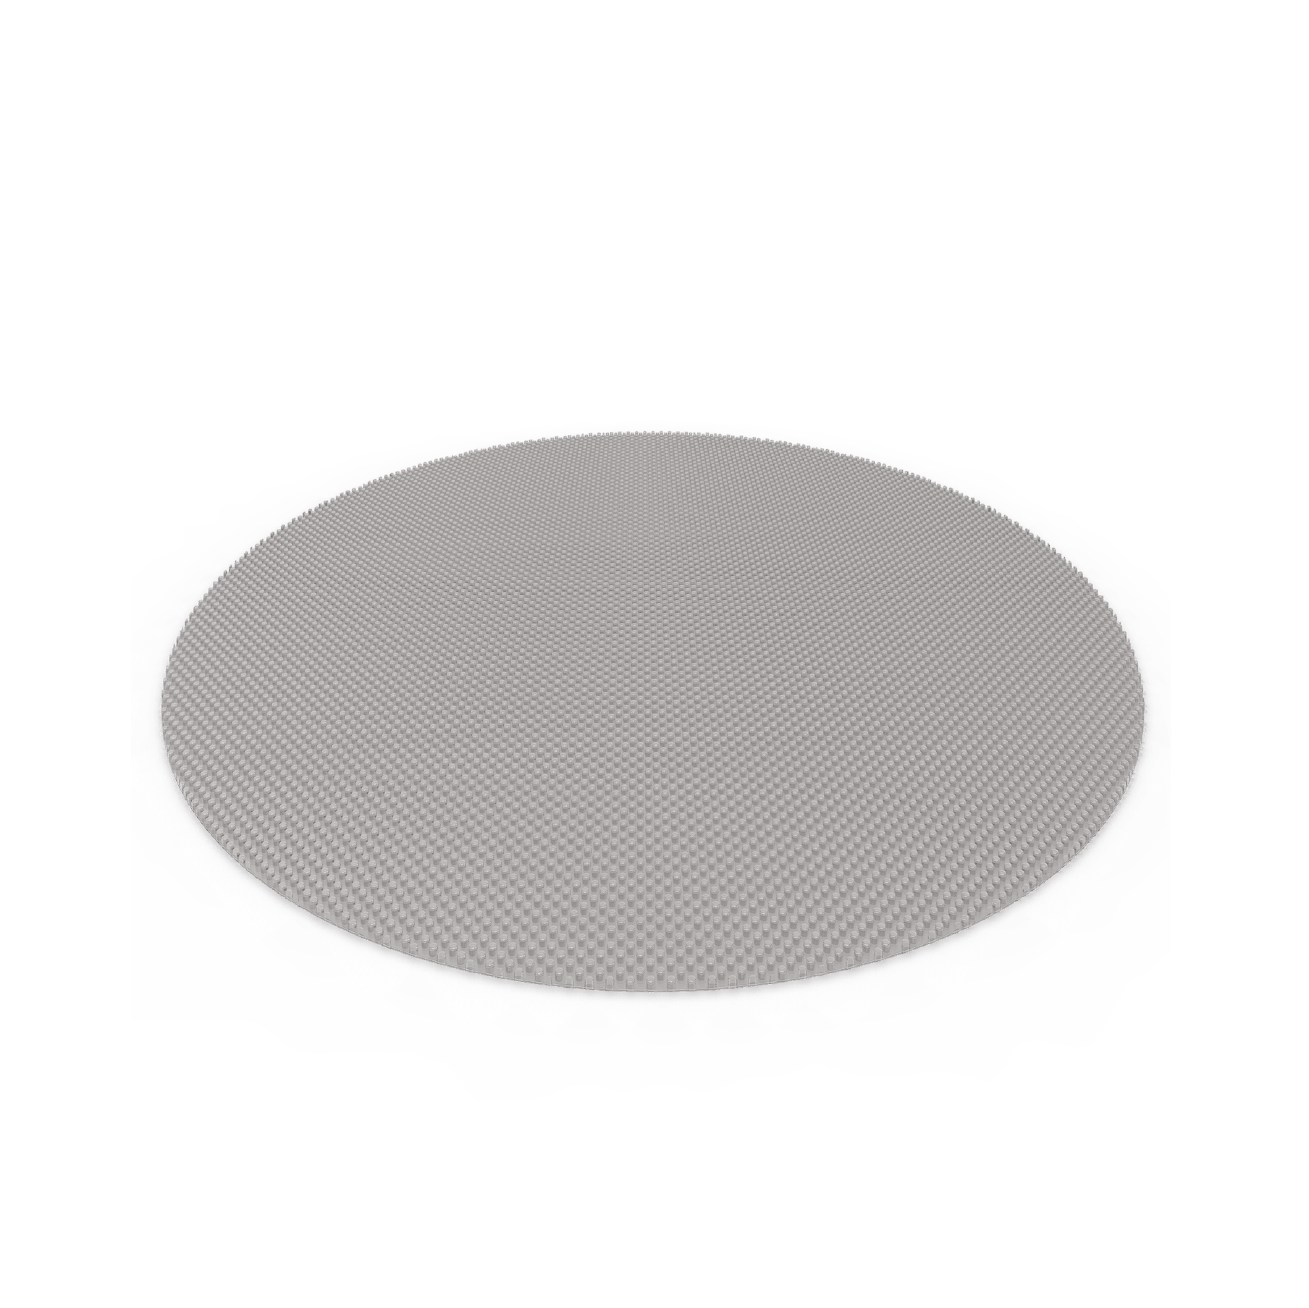 Wave Spa Round 4 Person Bubble Cover, Floating, Energy Saving Eco Liner - Insulating Products - Wave Spas USA